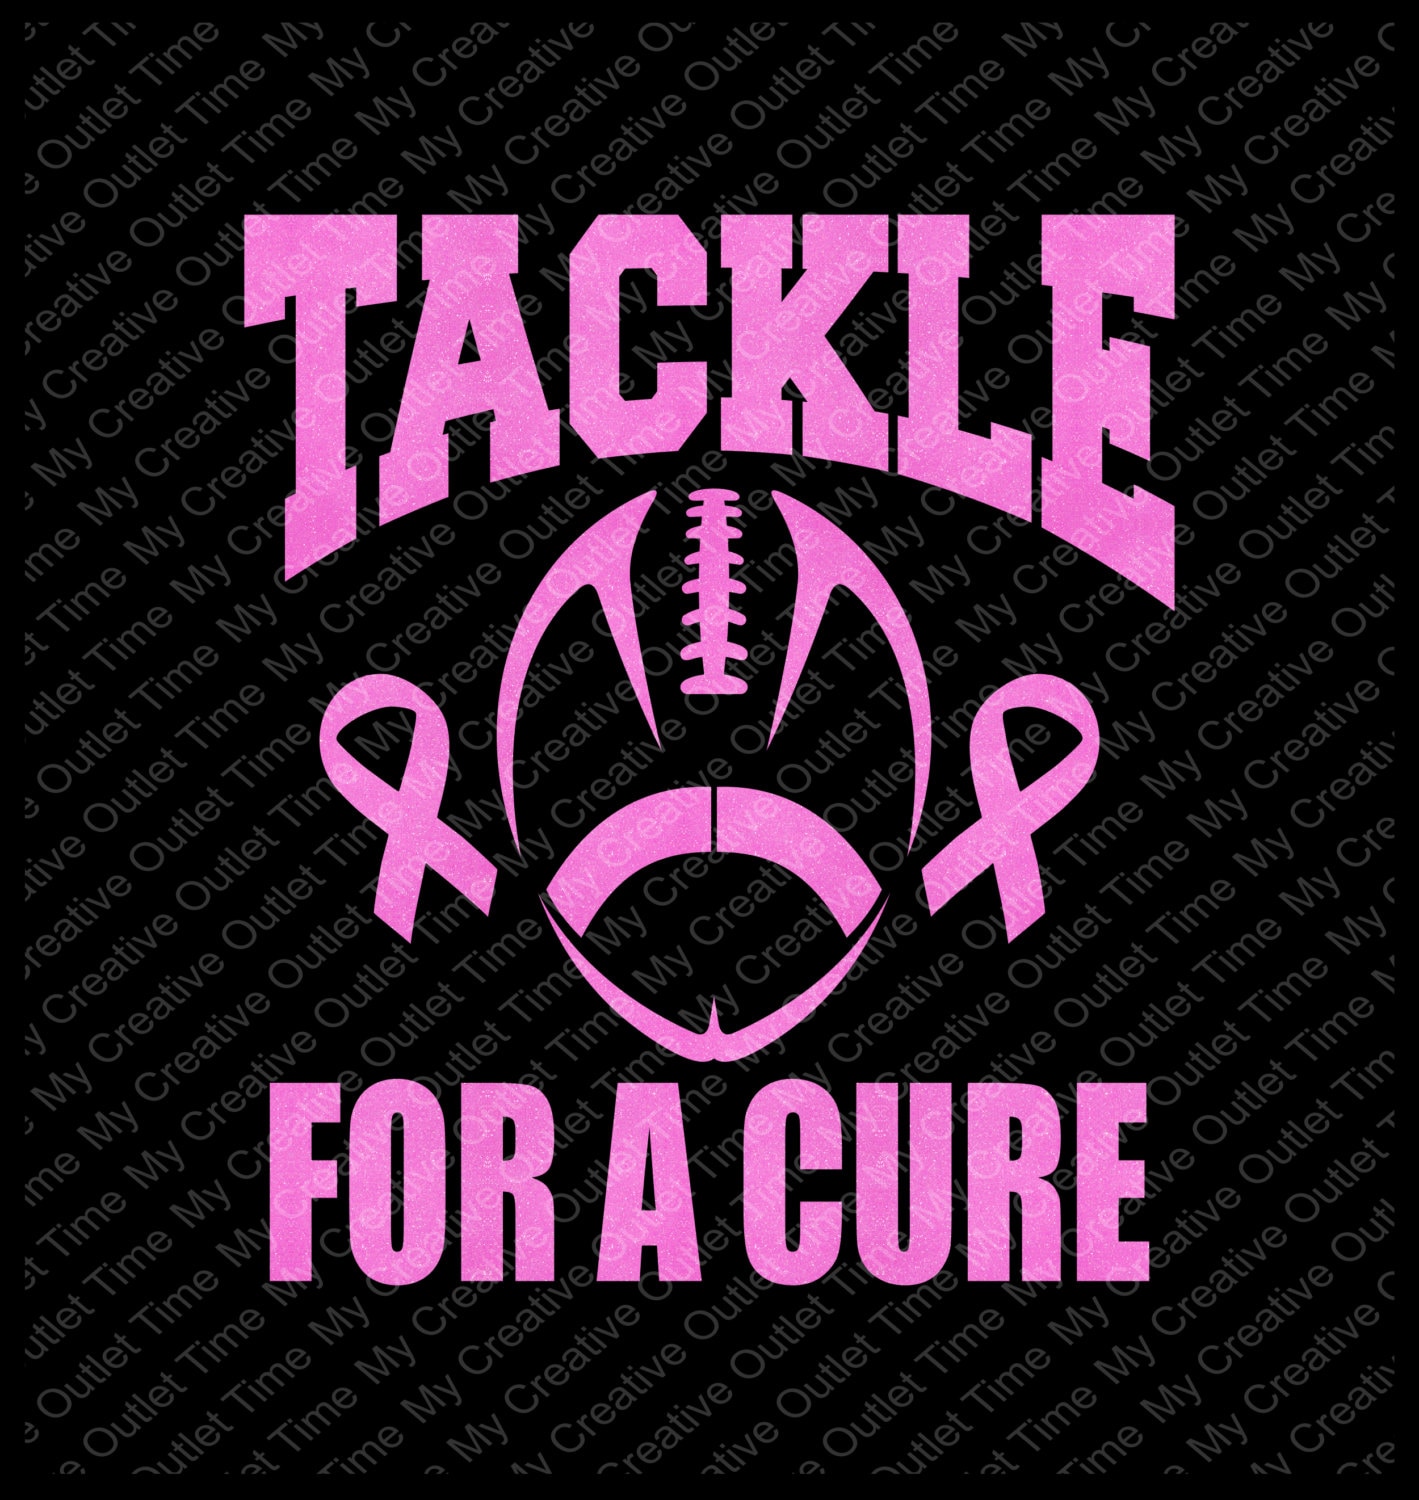 Custom Tackle Cancer Or Tackle For A Cure Football Breast